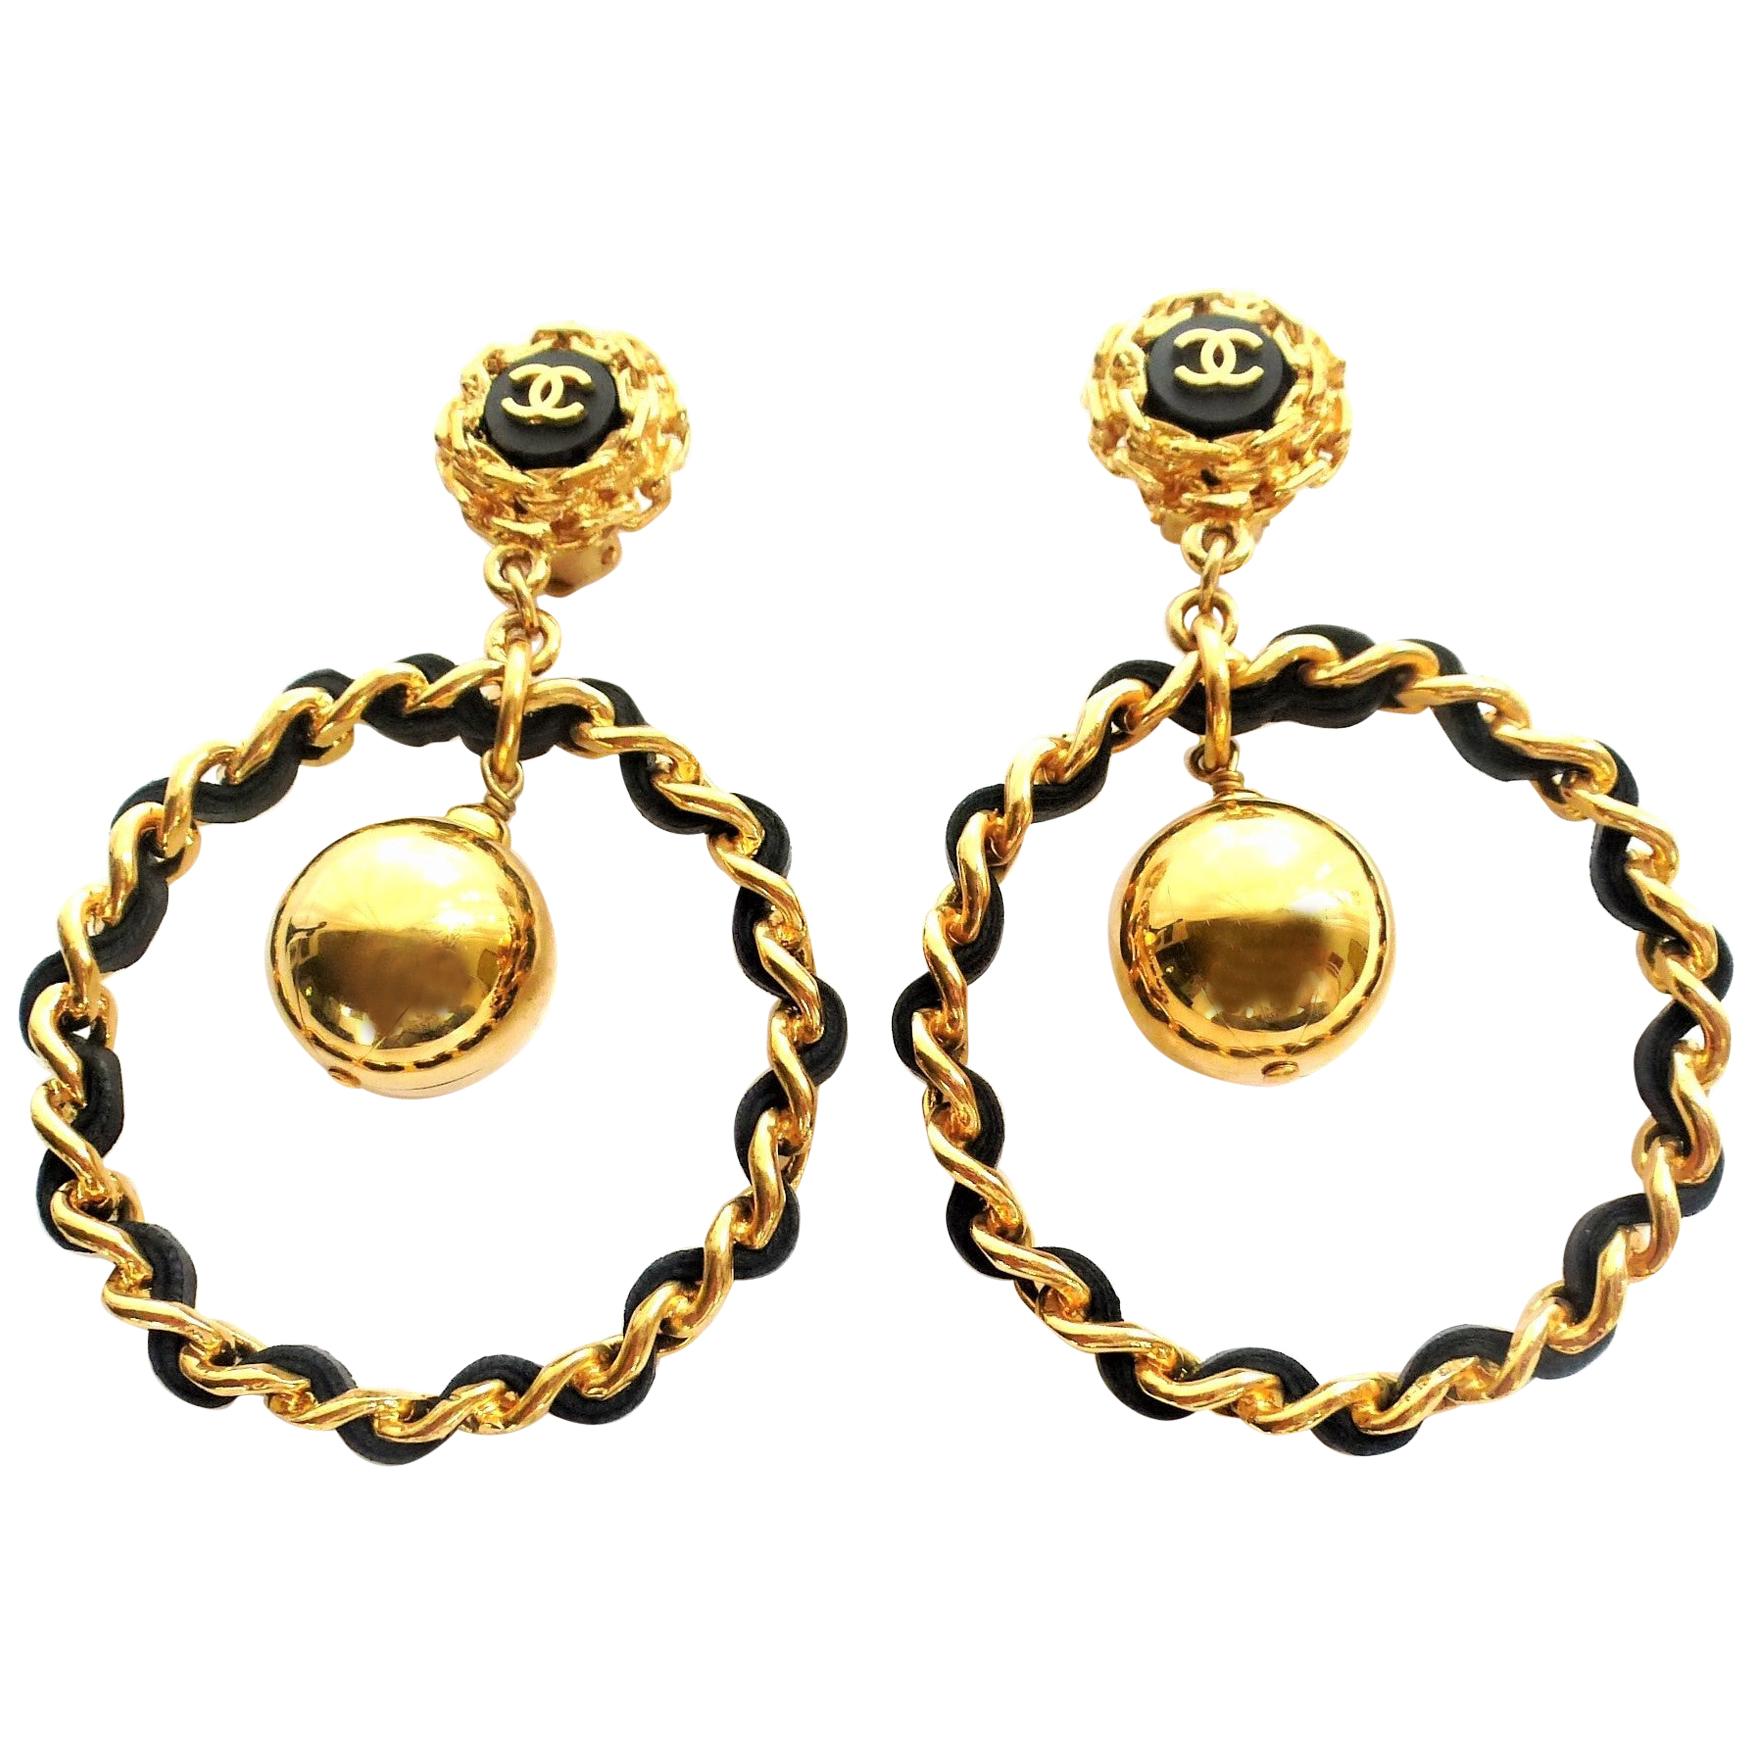 Chanel loop clip-on earring singed by Victoire de Castellane, gold plated 1990s